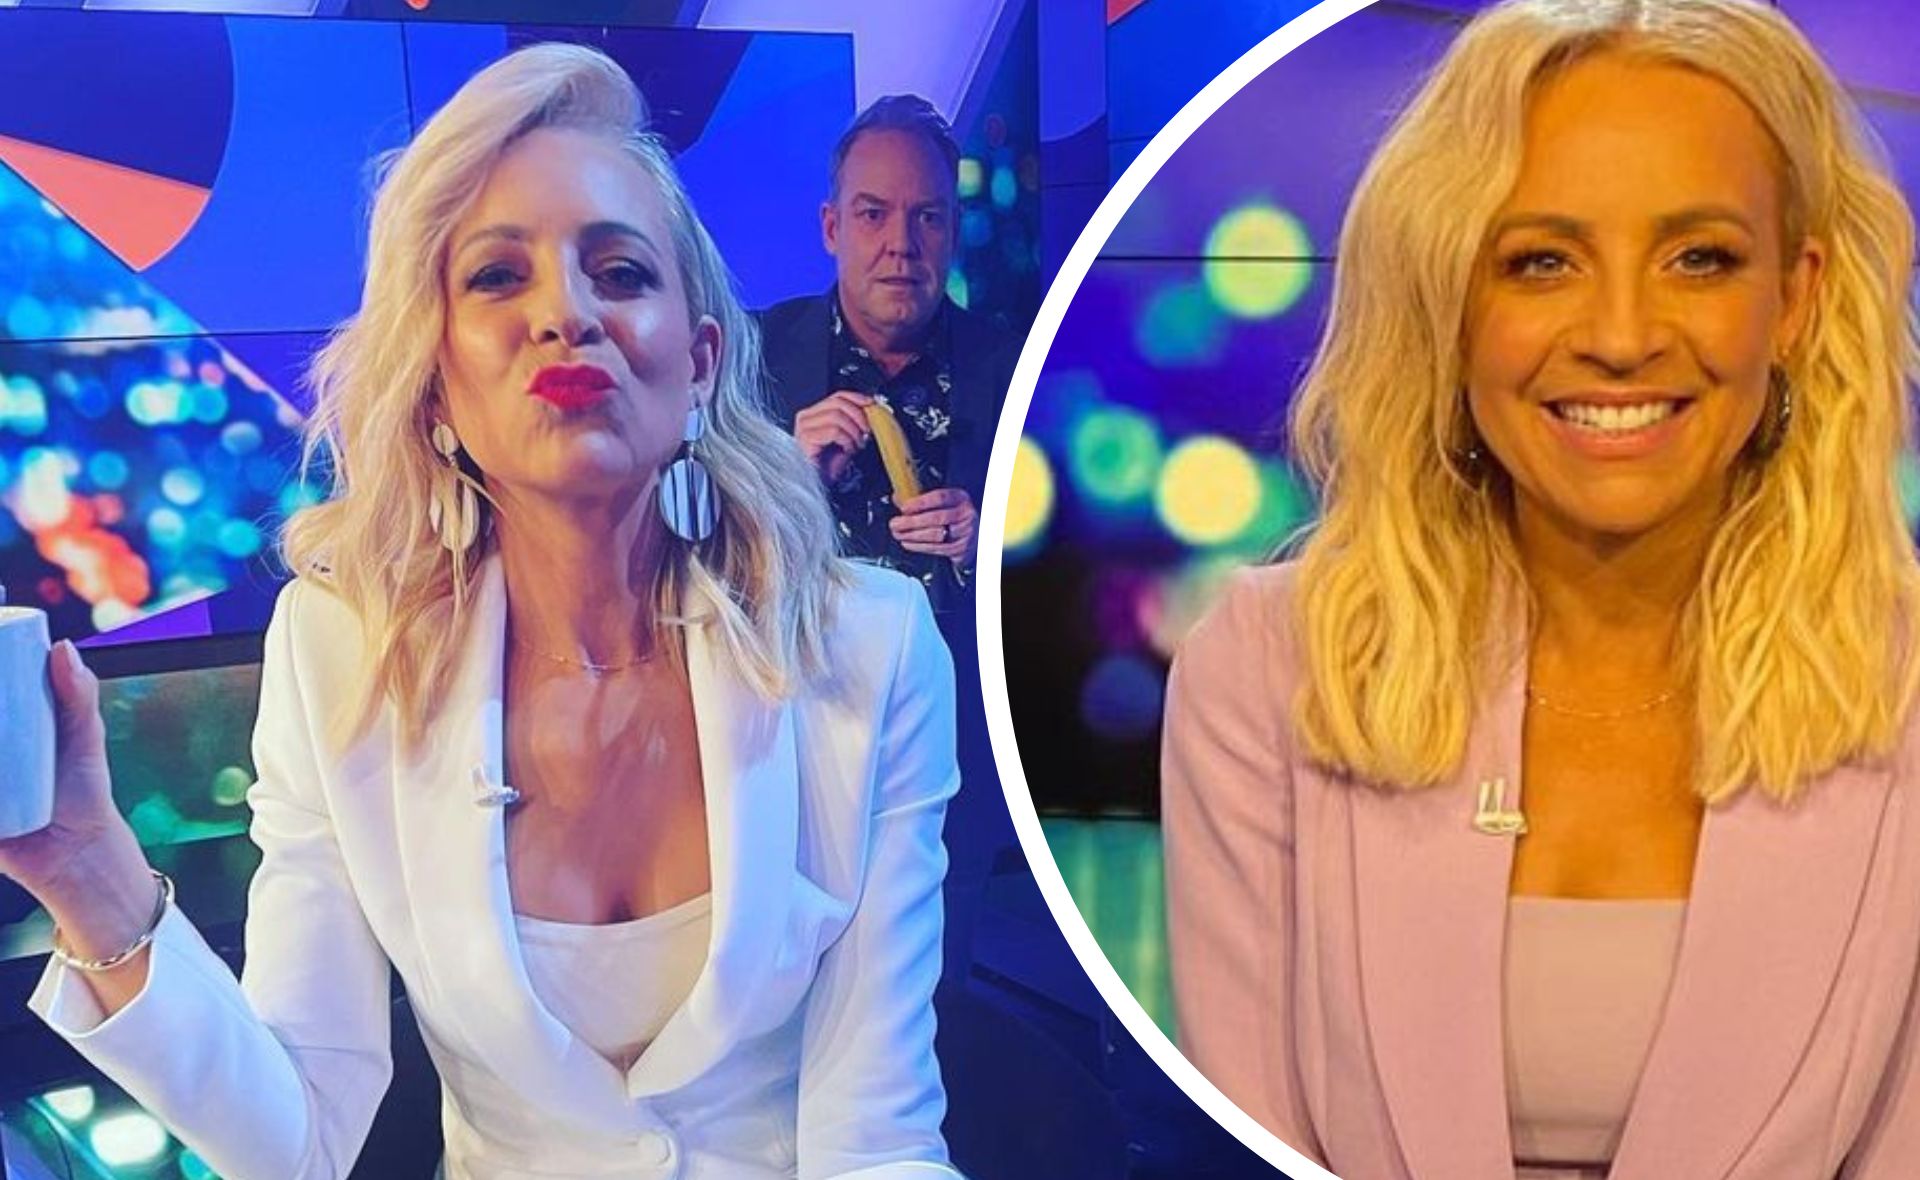 The real reason why Carrie Bickmore is resigning The Project is clear after newly released details